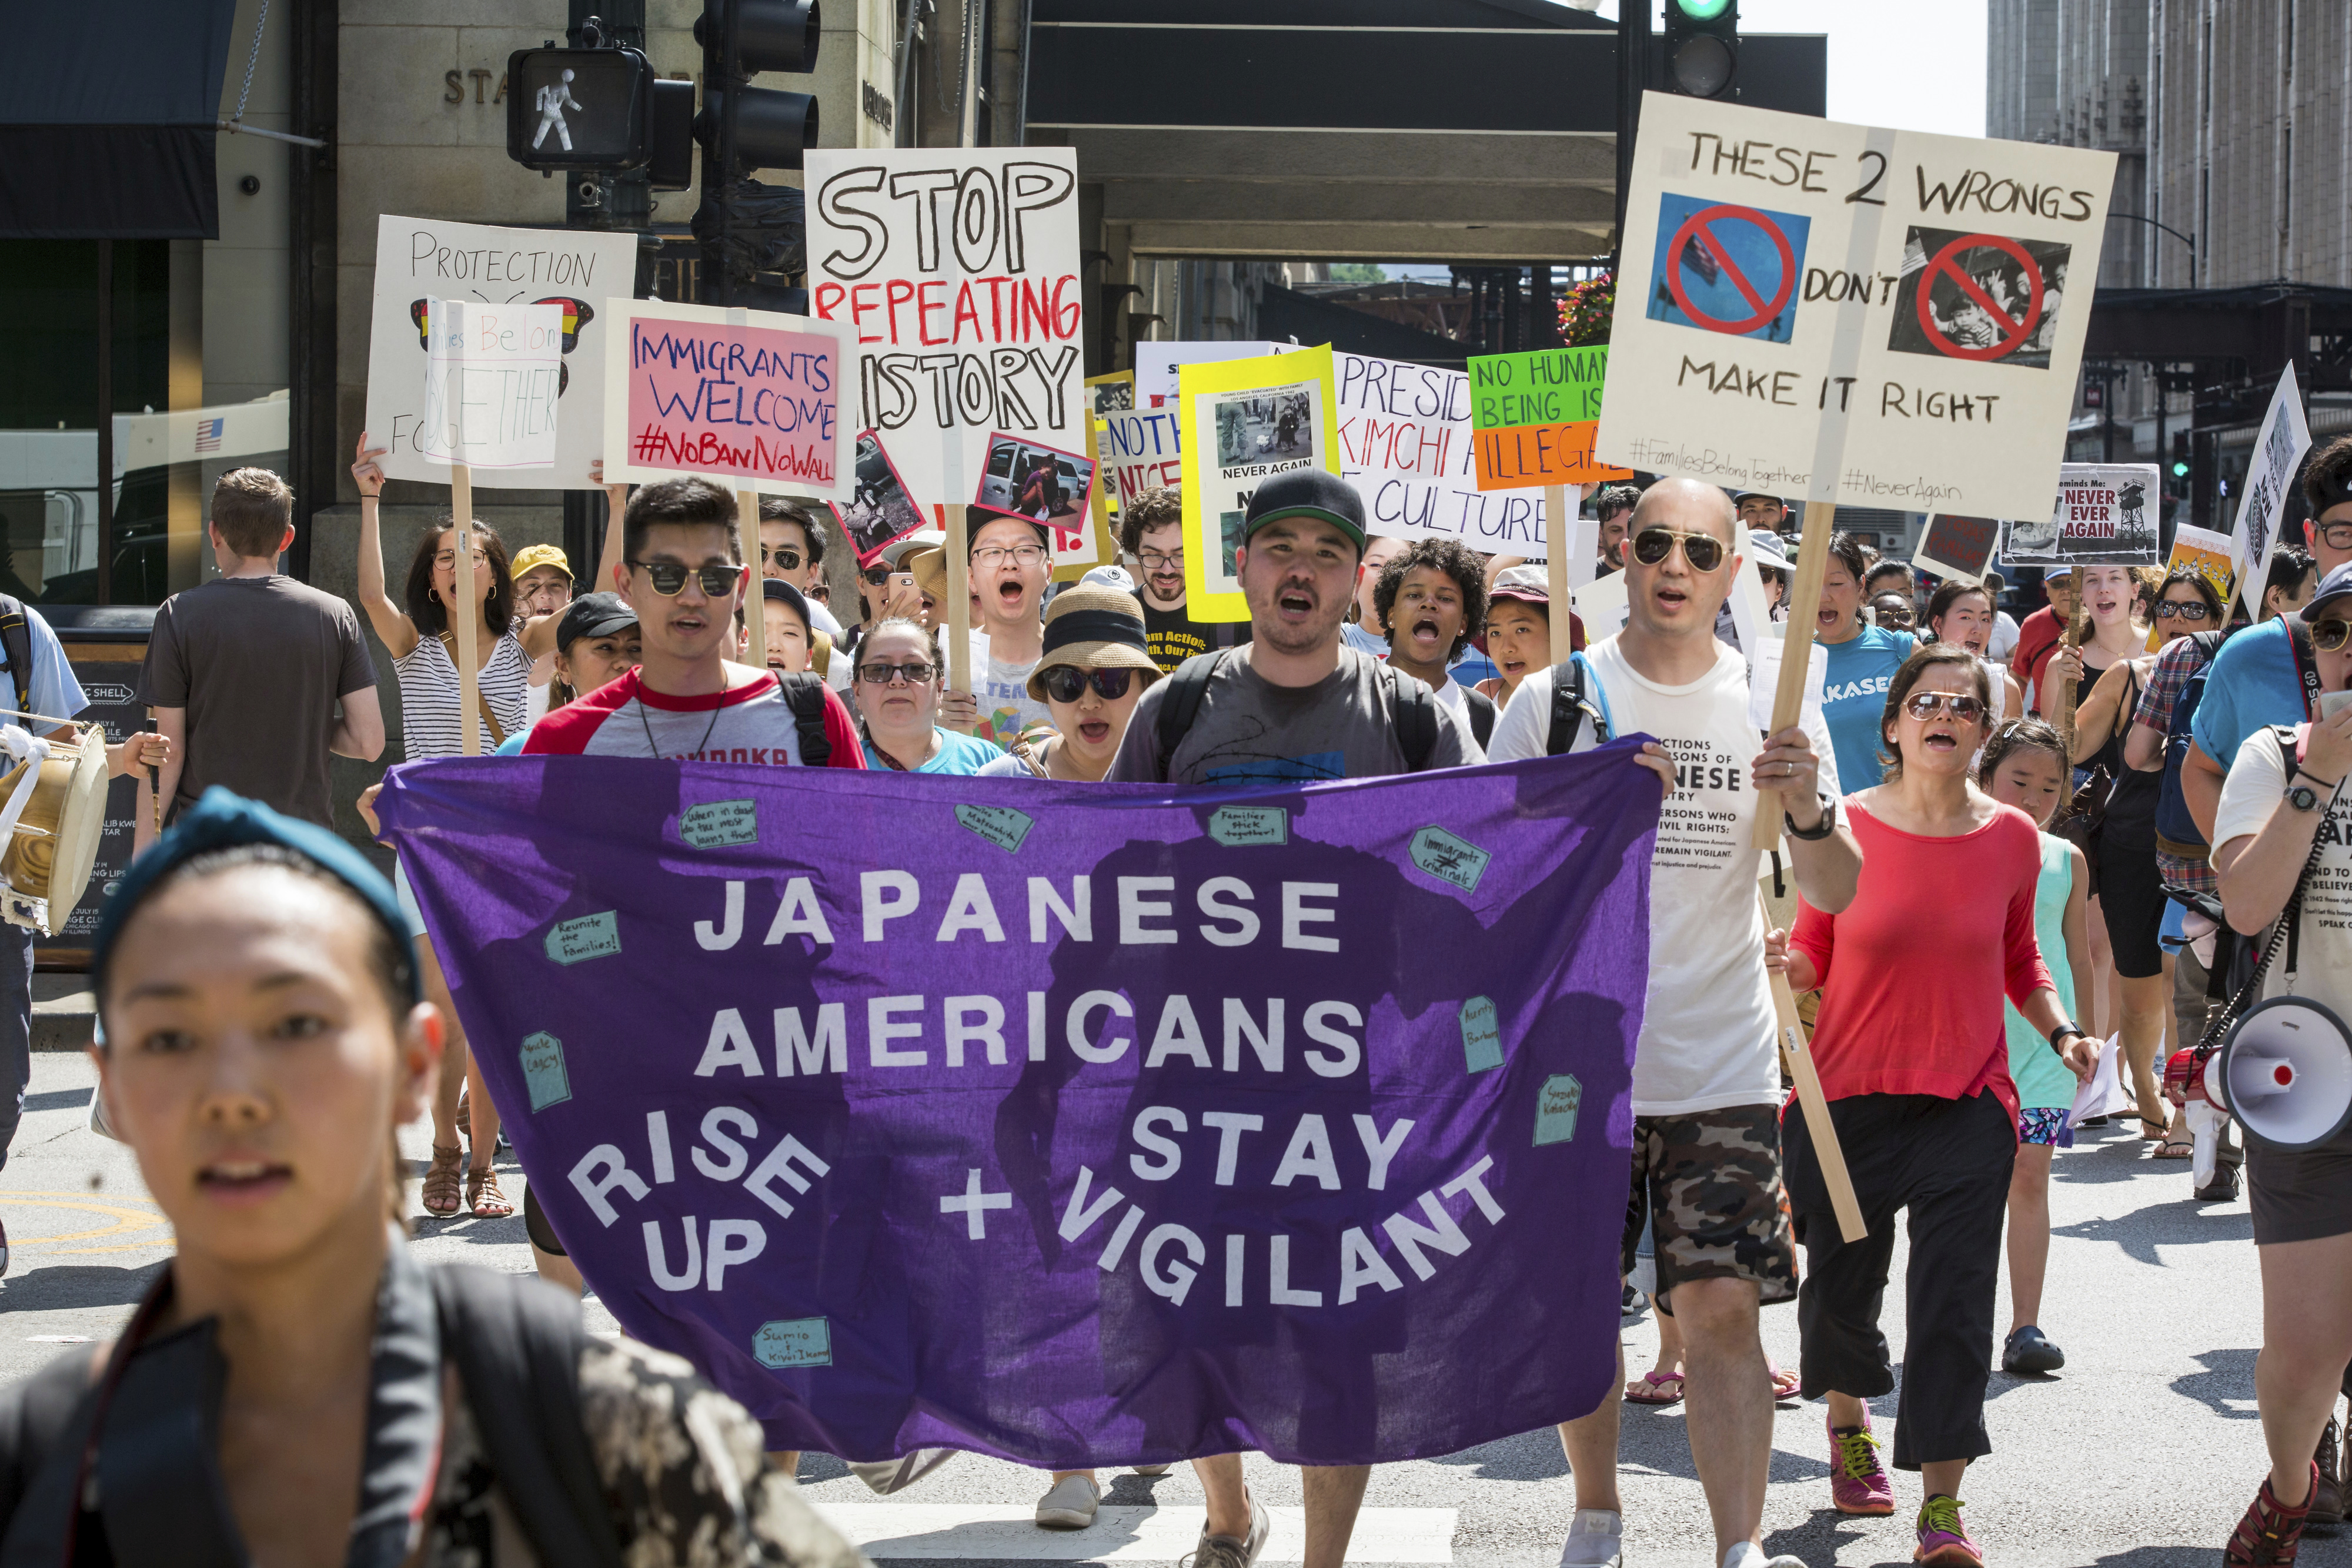 A consortium of Asian-American groups brought together by the Japanese American Service Community participate in the Families Belong Together march in Chicago on Saturday, June 30, 2018. In major cities and tiny towns, marchers gathered across America, moved by accounts of children separated from their parents at the U.S.-Mexico border, in the latest act of mass resistance against President Donald Trump's immigration policies. (James Foster/Chicago Sun-Times via AP)